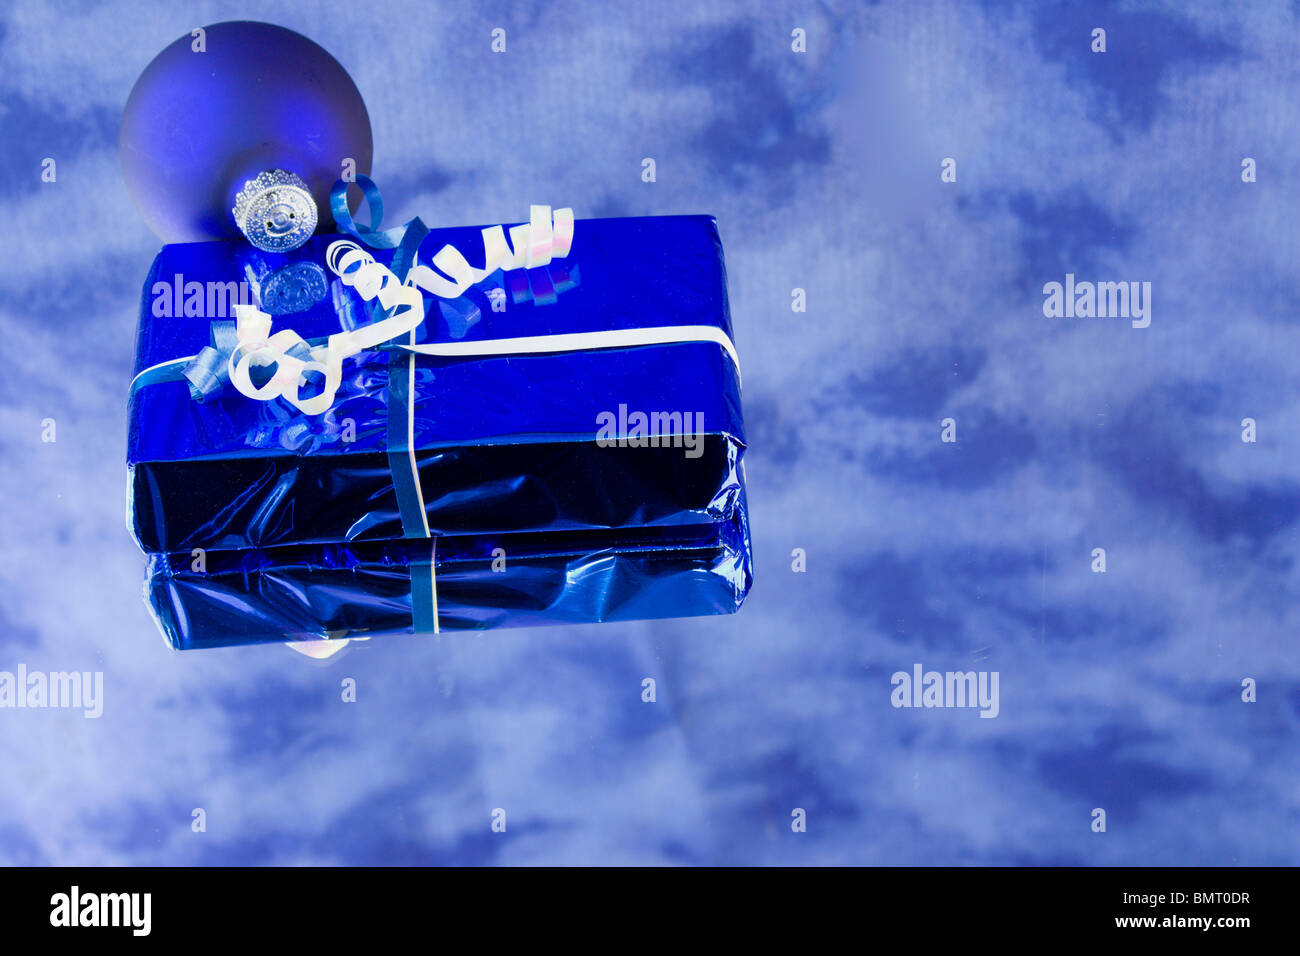 Blue foil wrapped Christmas present with bauble, reflections, and copyspace Stock Photo